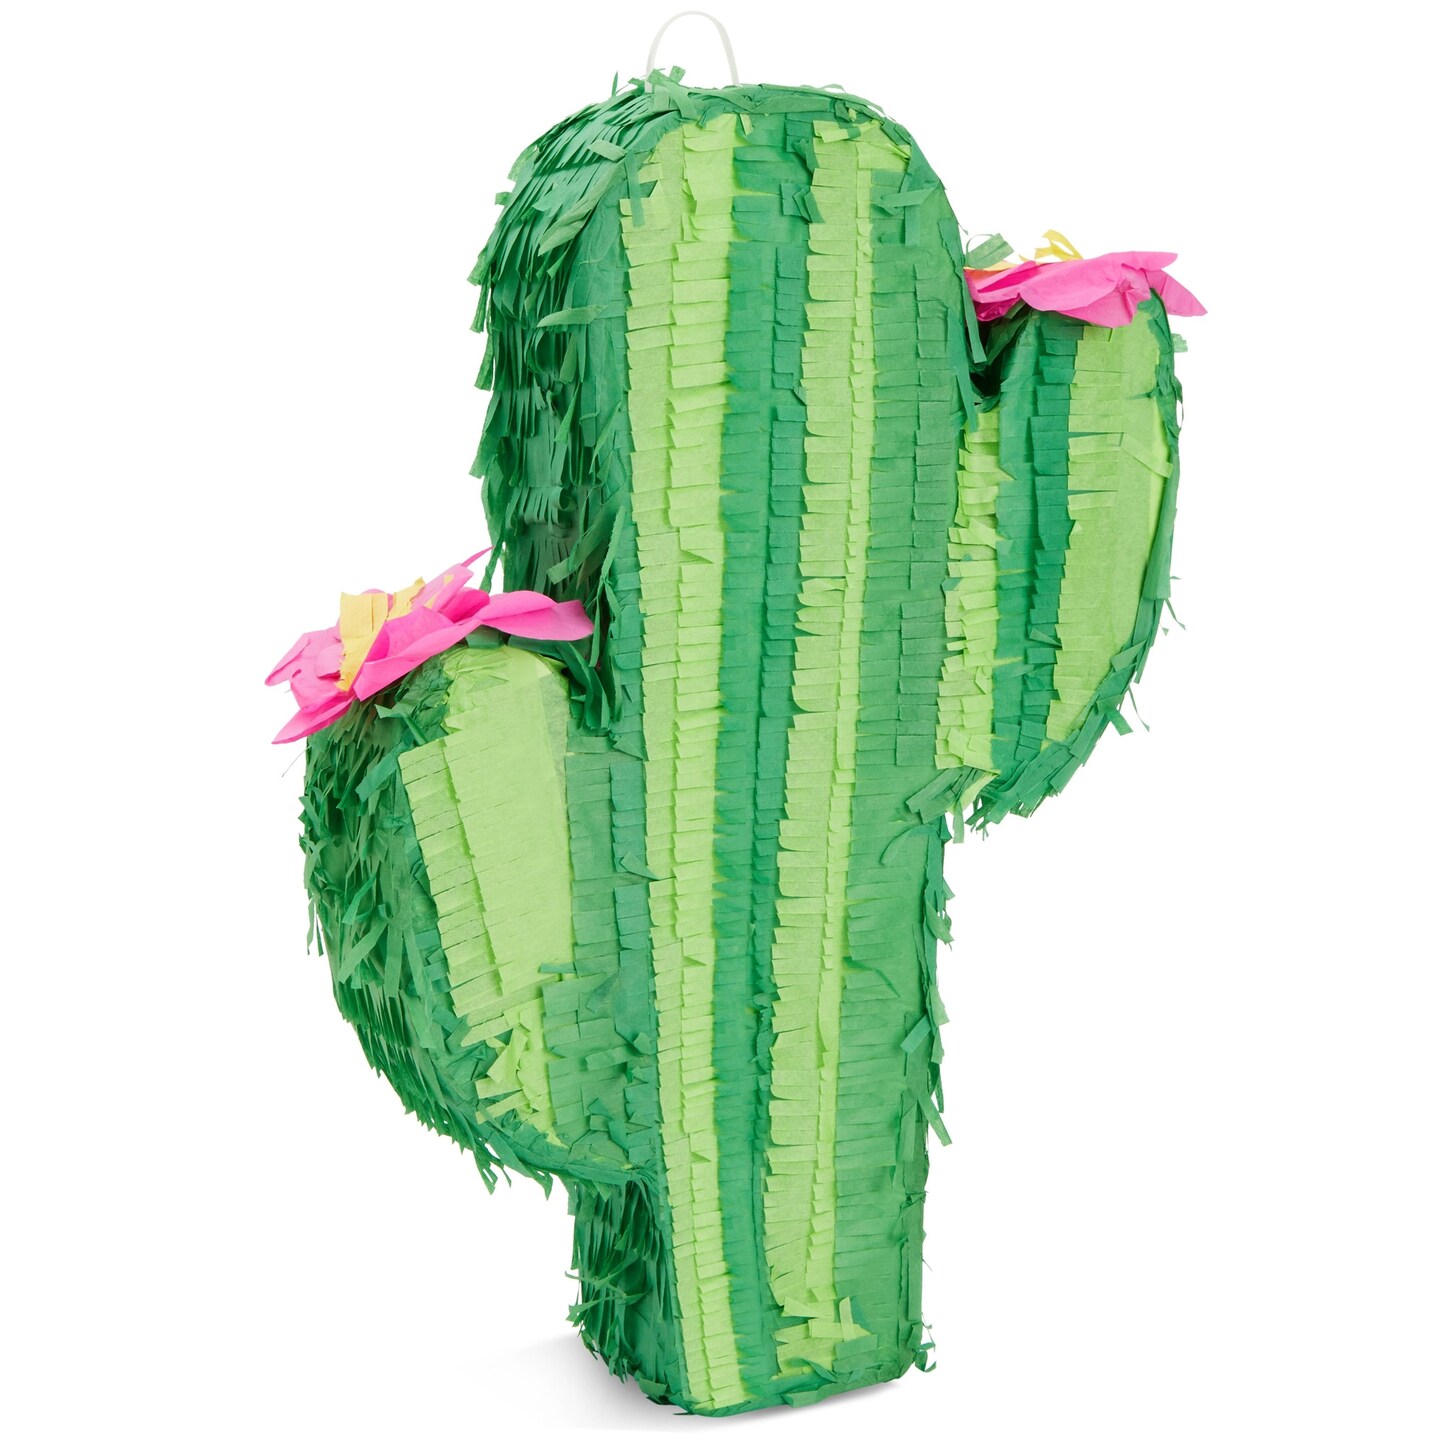 Small Cactus Pinata for Kids Birthday, Baby Shower, Cinco de Mayo, Mexican Fiesta Party Decorations (17 x 11.5 In)